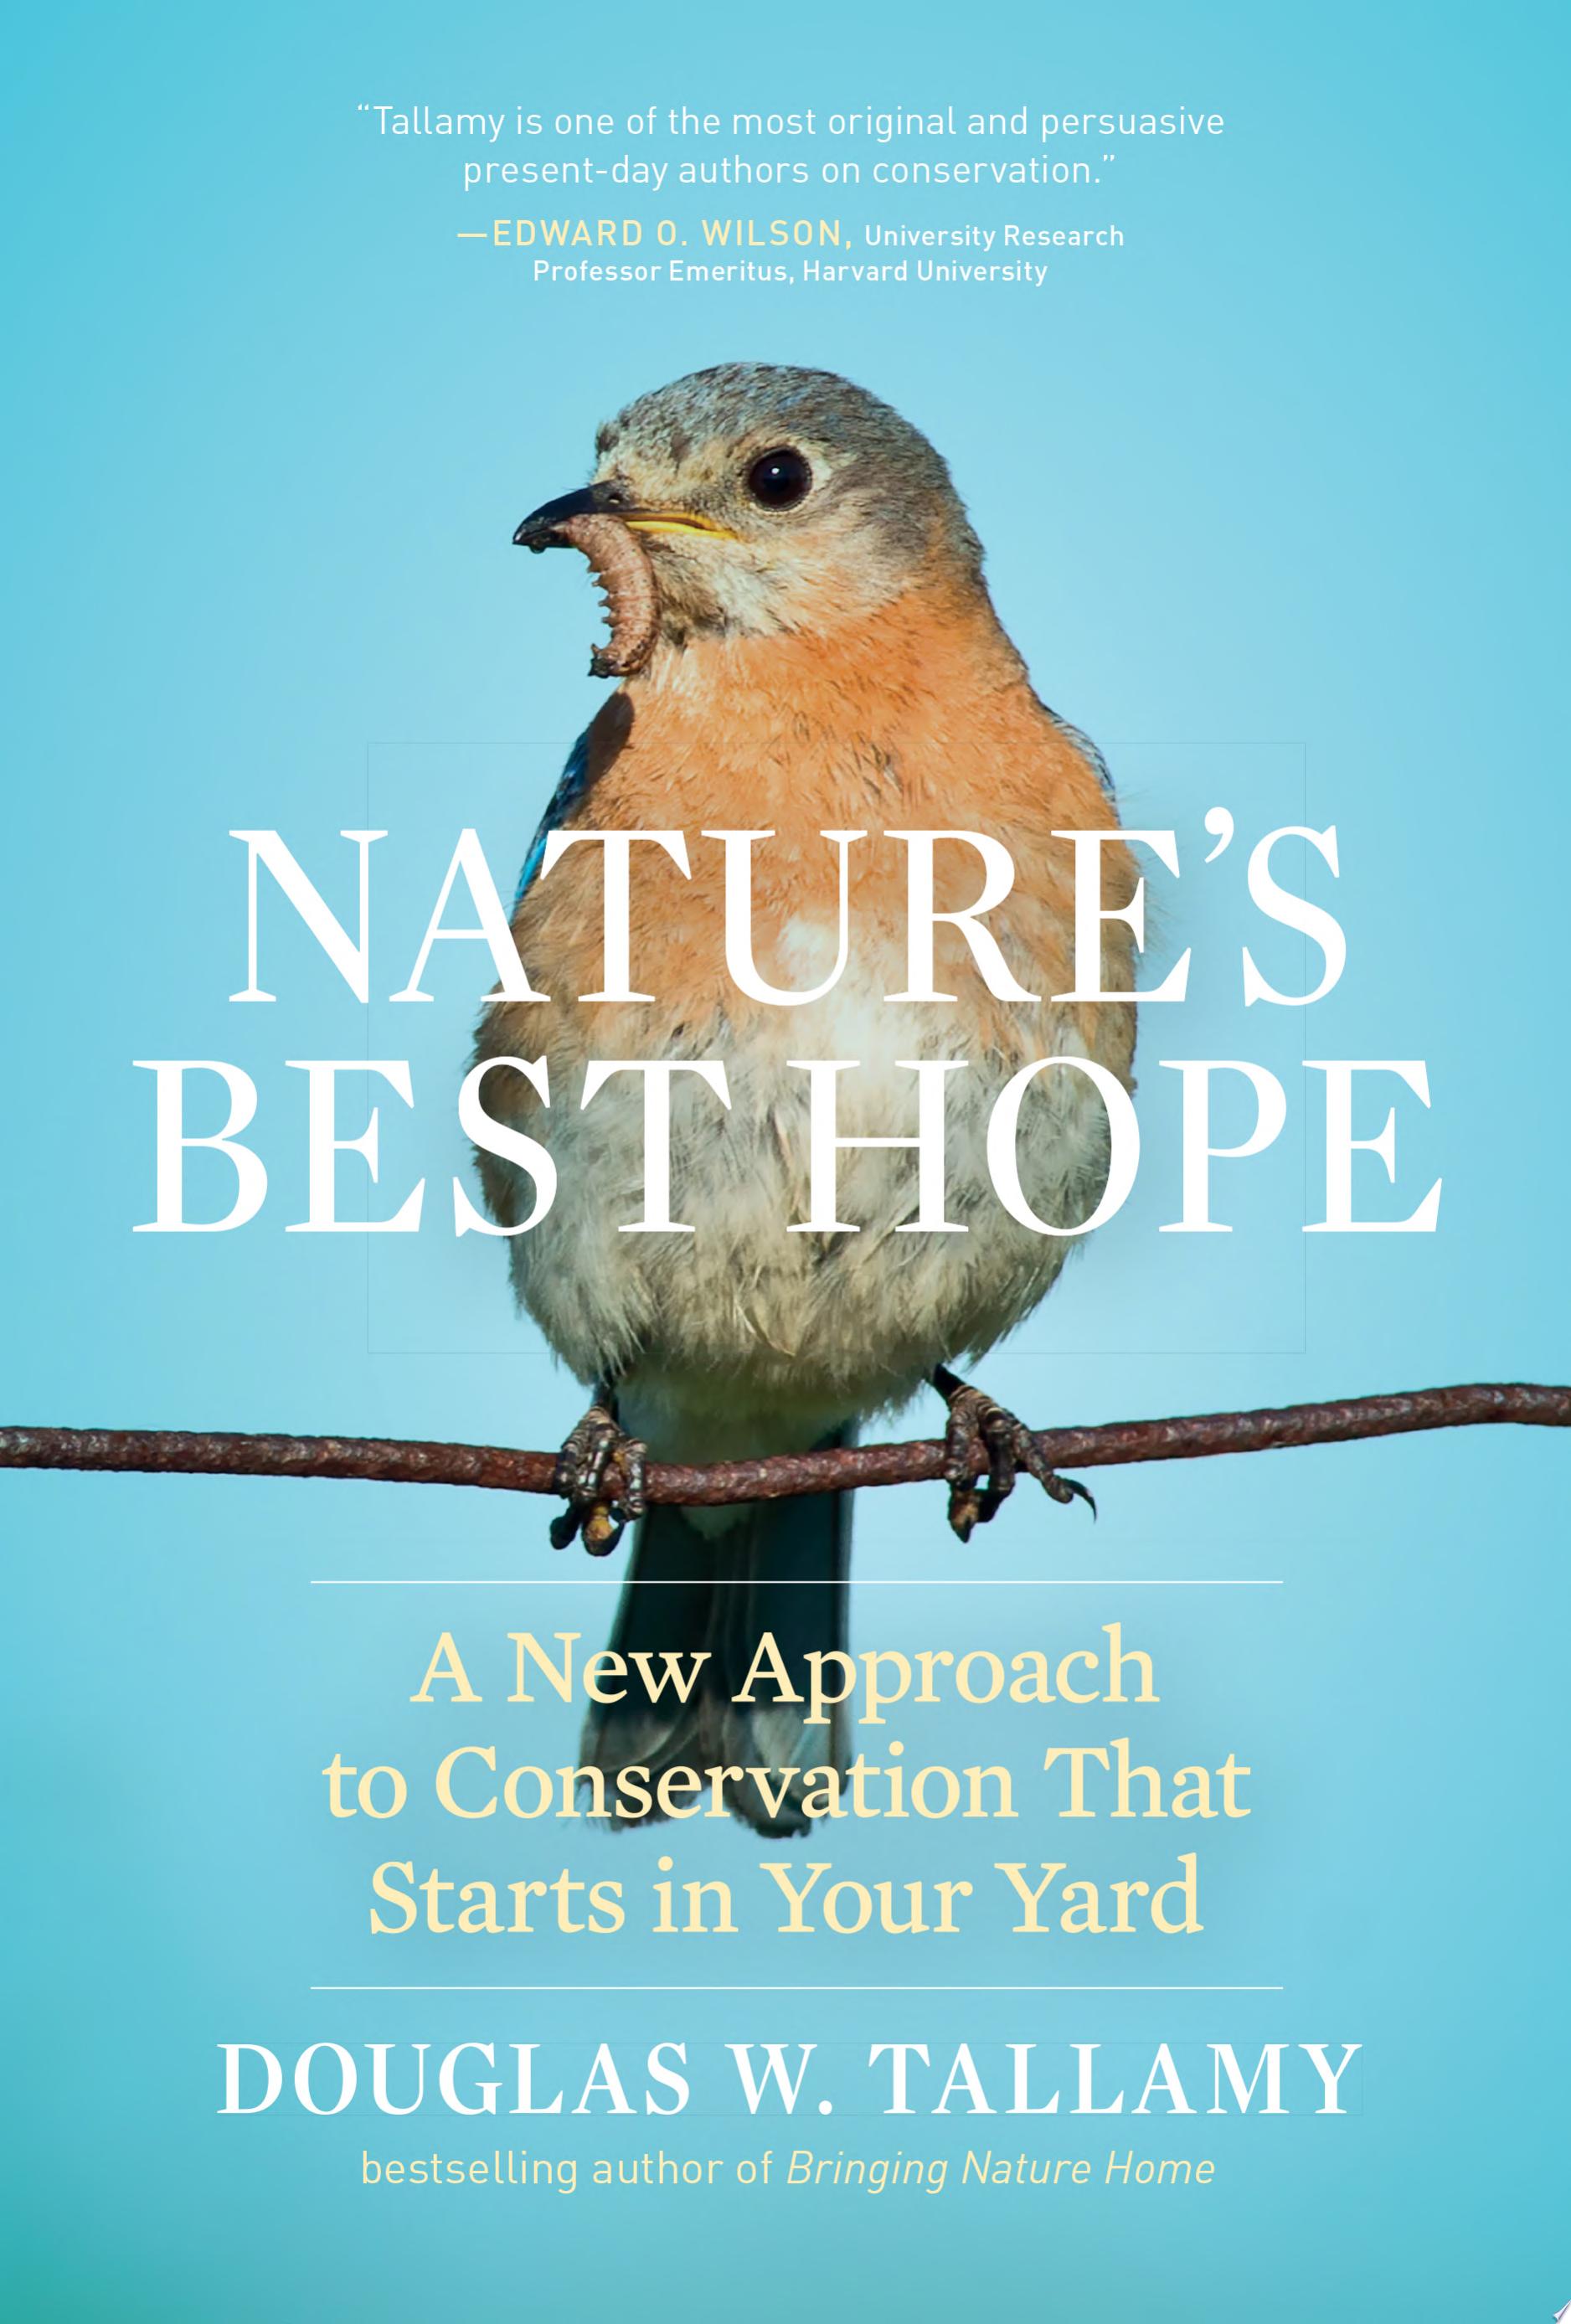 Image for "Nature's Best Hope"